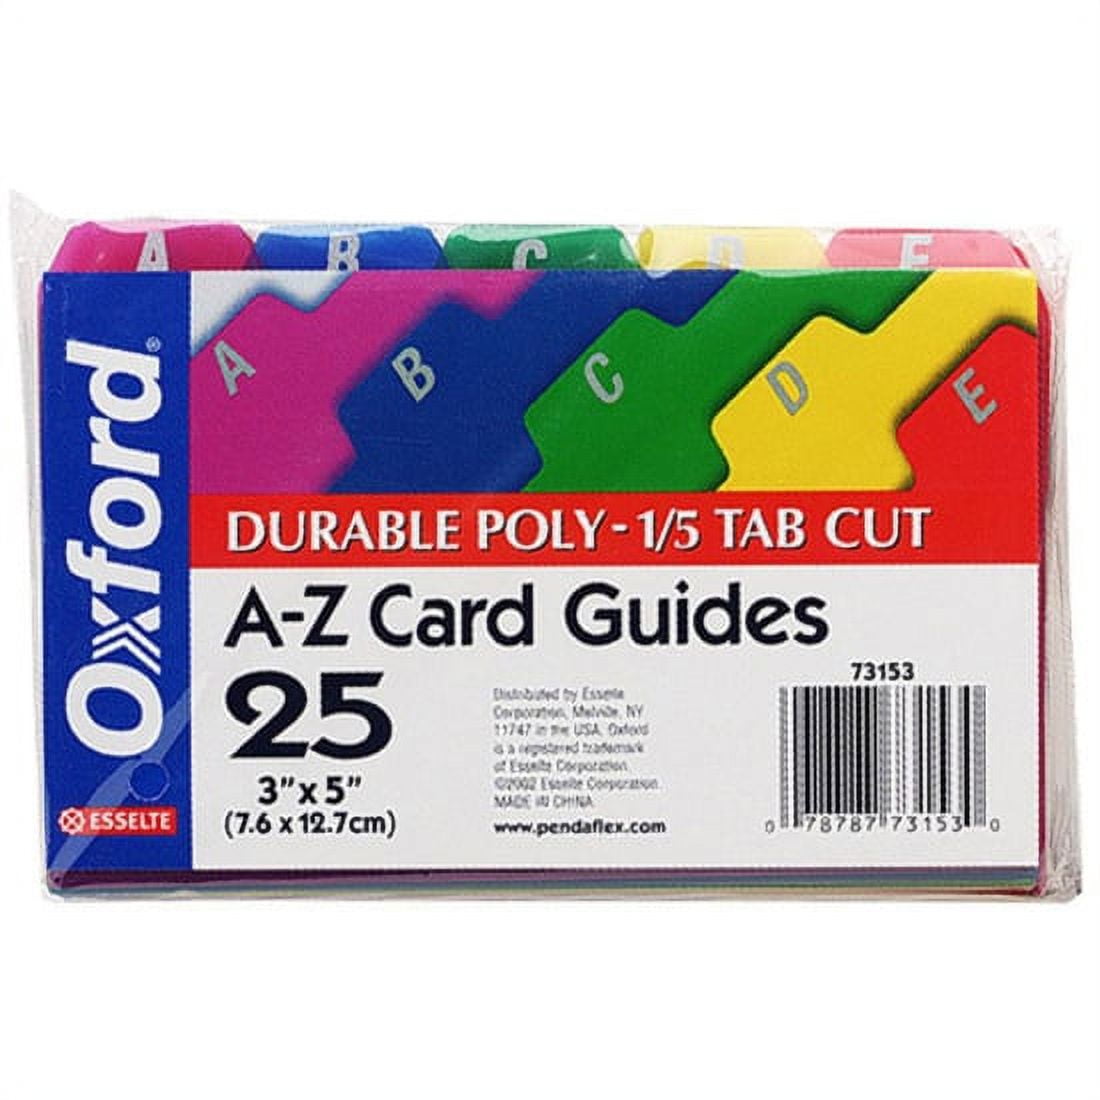 Color Coded Ruled Index Cards by Oxford™ OXF04753